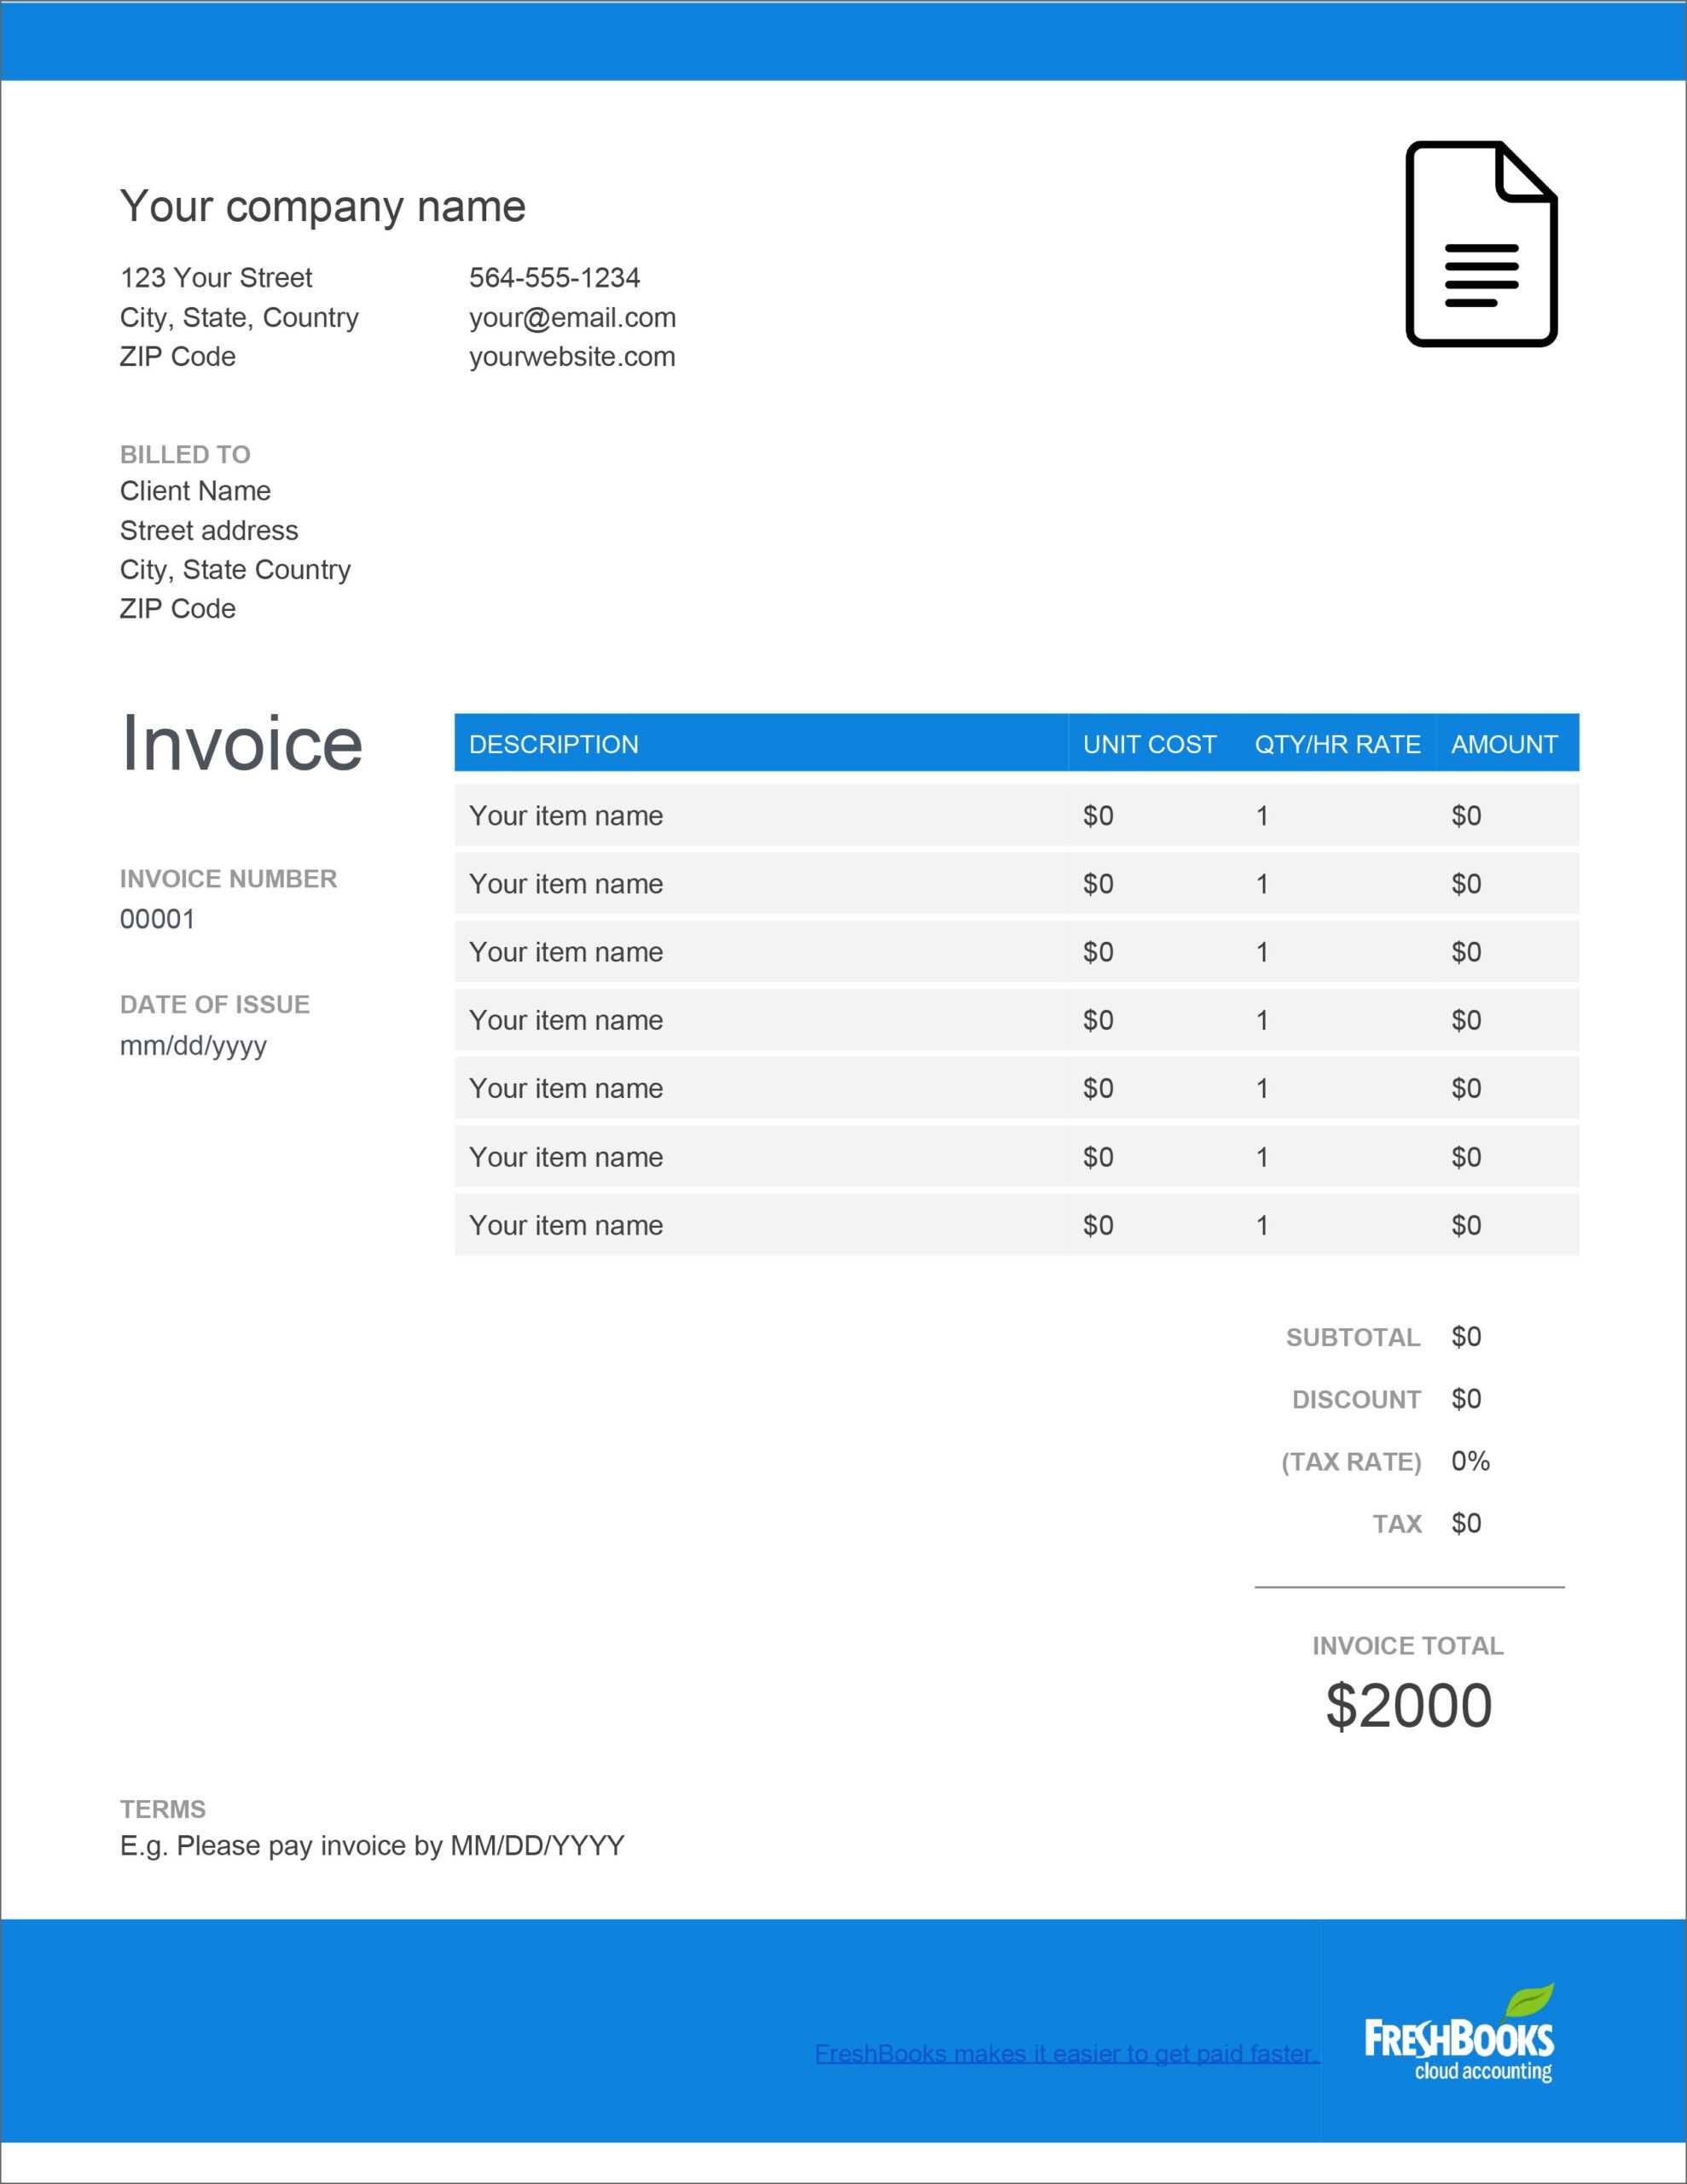 32 Free Invoice Templates In Microsoft Excel And Docx Formats Within Microsoft Office Word Invoice Template